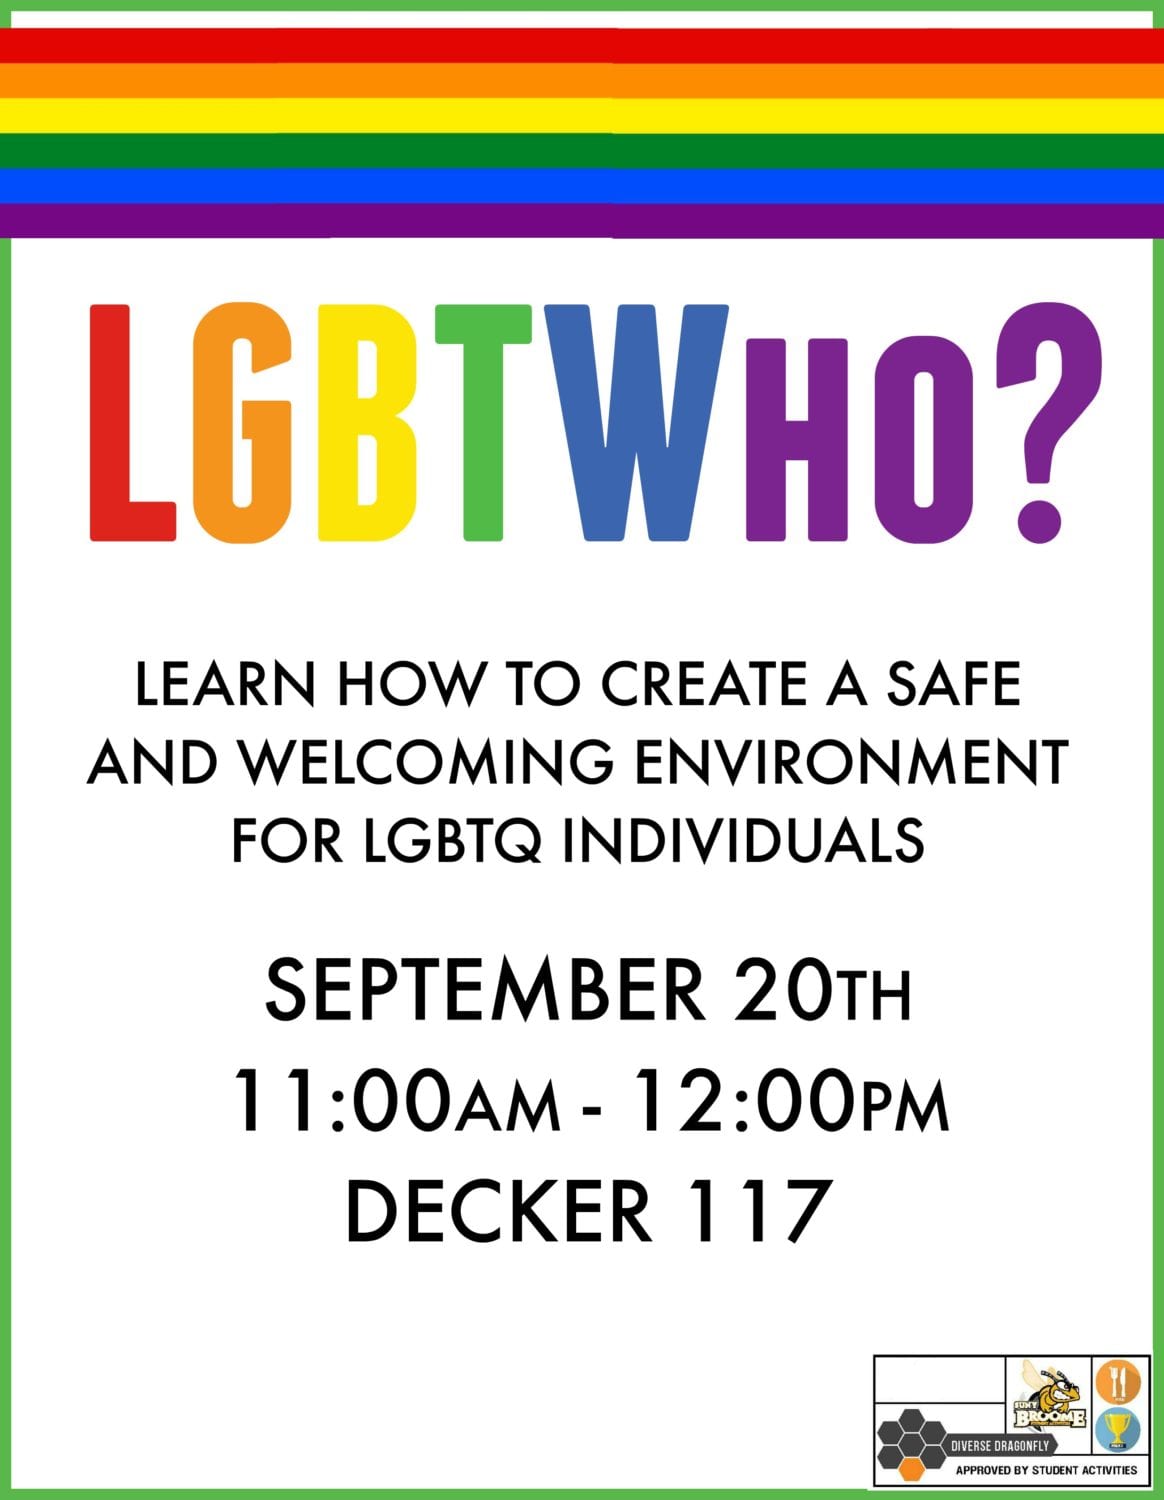 LGBTWho? Learn how to create an inclusive environment on Sept. 20